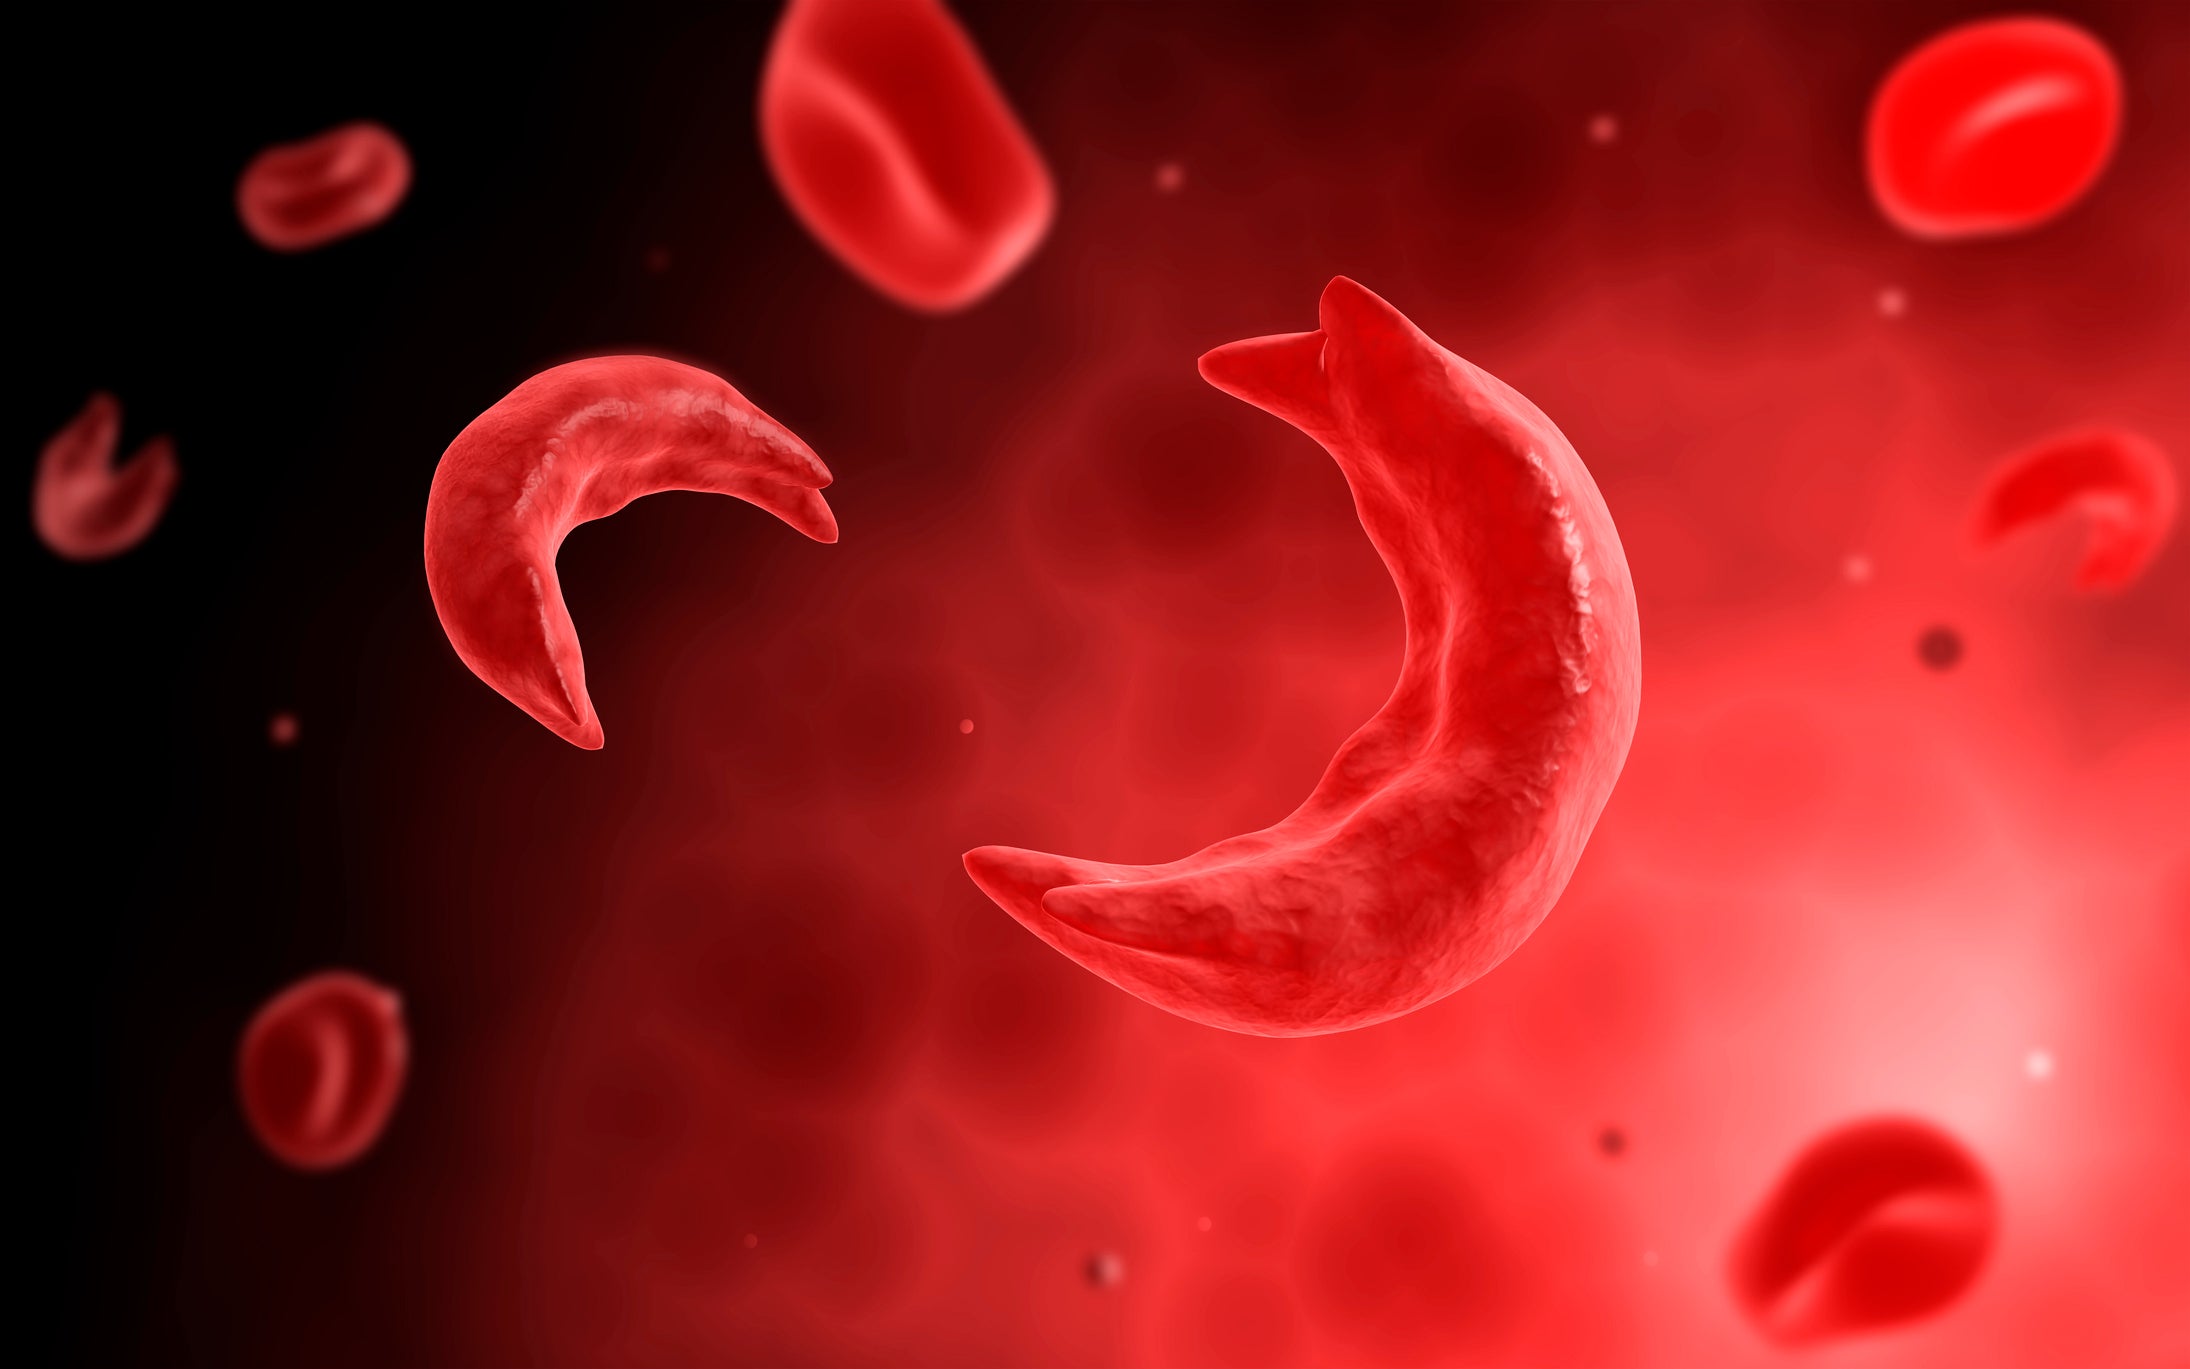 Health Matters: FDA Approves Groundbreaking Gene-Editing Tool That Could Cure Sickle Cell Disease